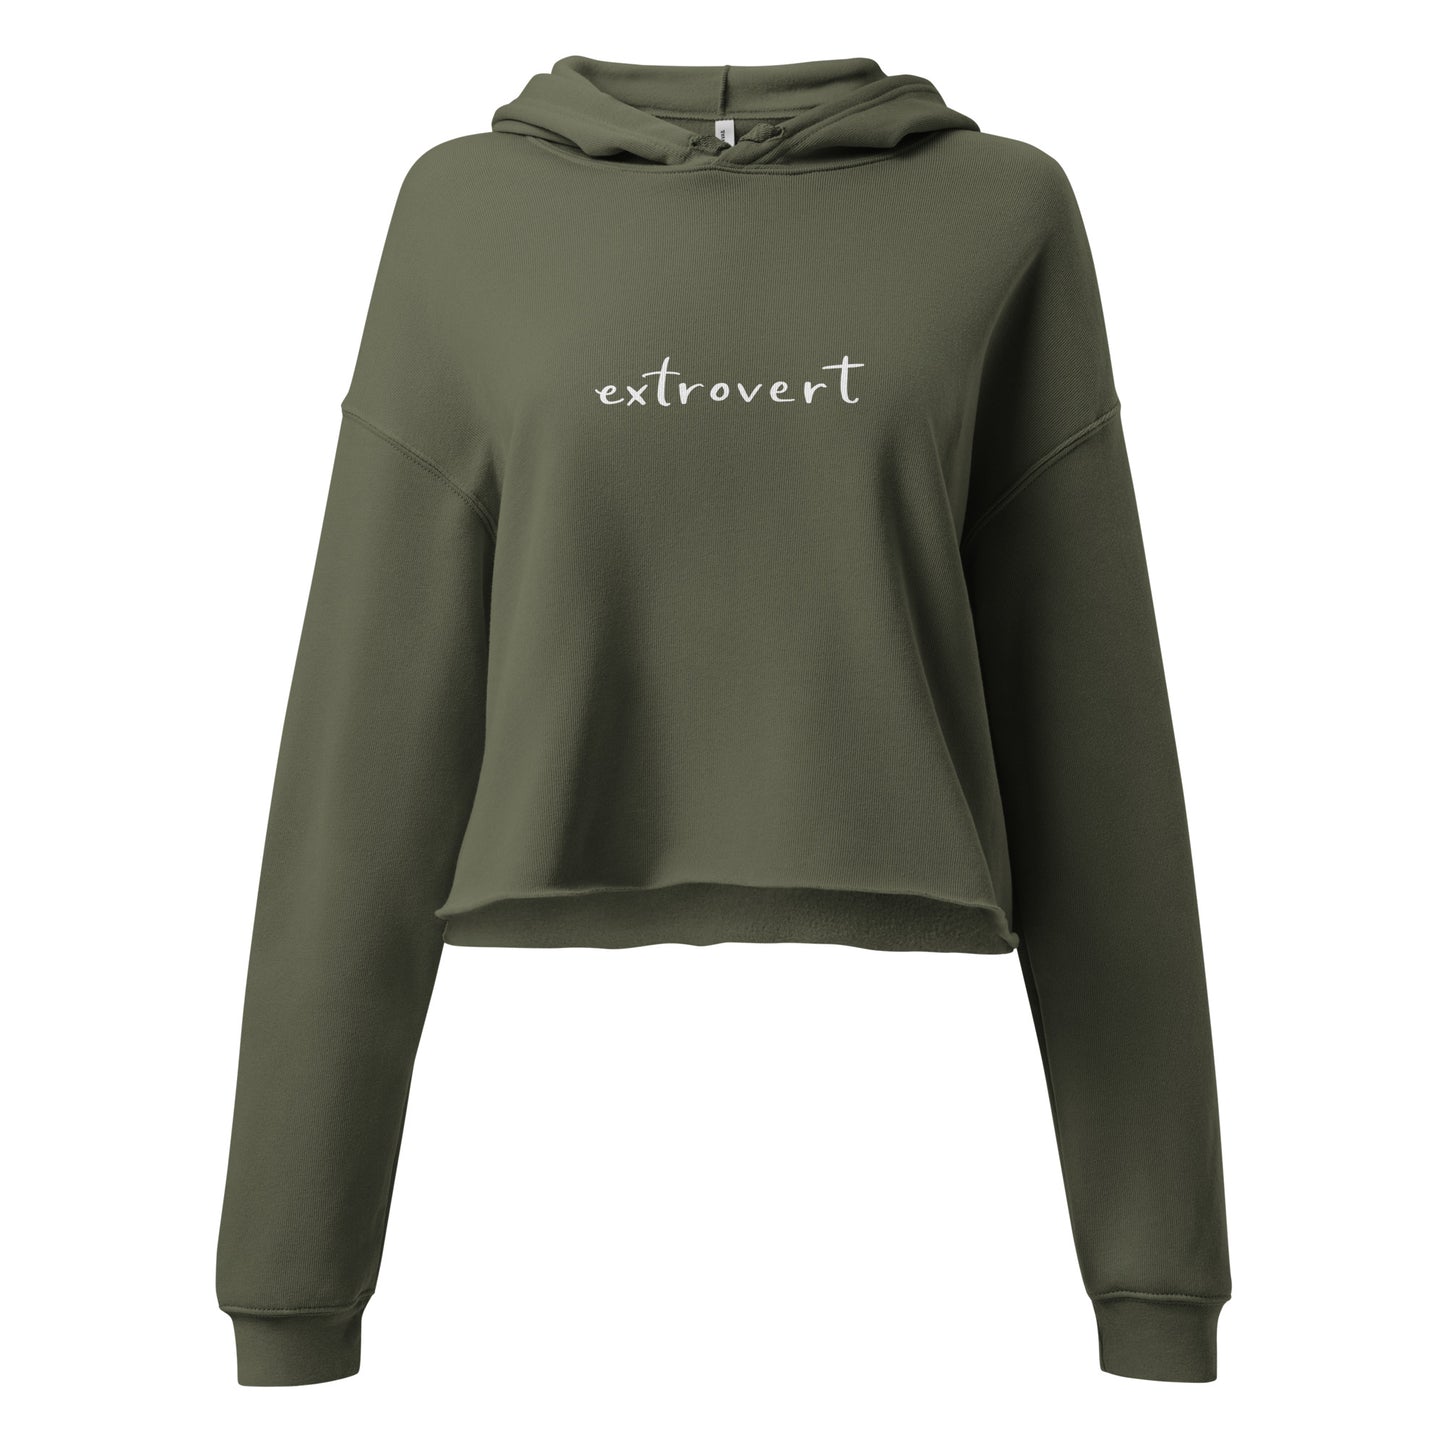 Cropped hoodie "extrovert"